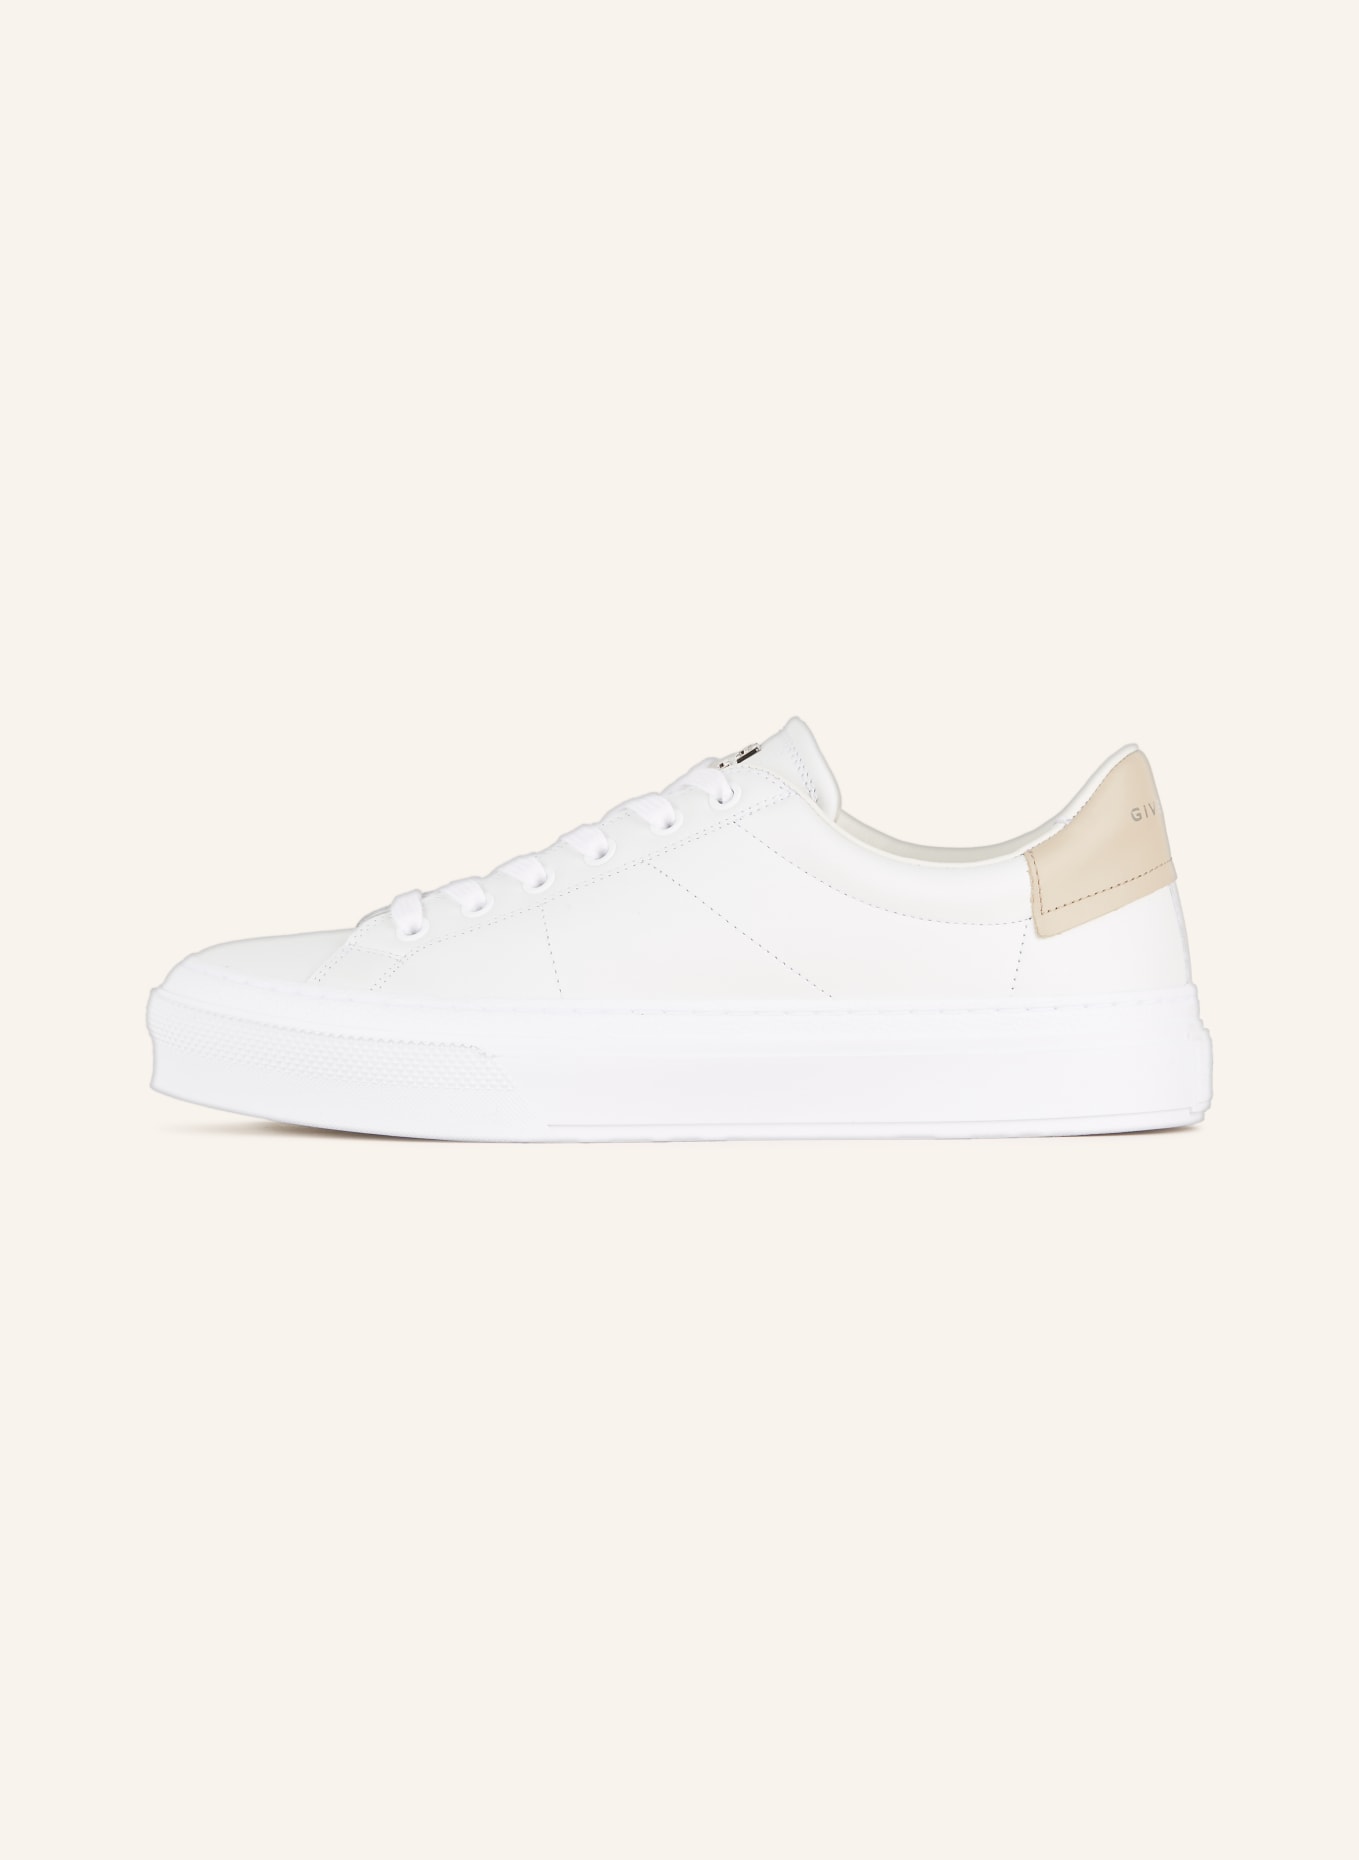 GIVENCHY Sneaker CITY , Farbe: WEISS/ BEIGE (Bild 4)